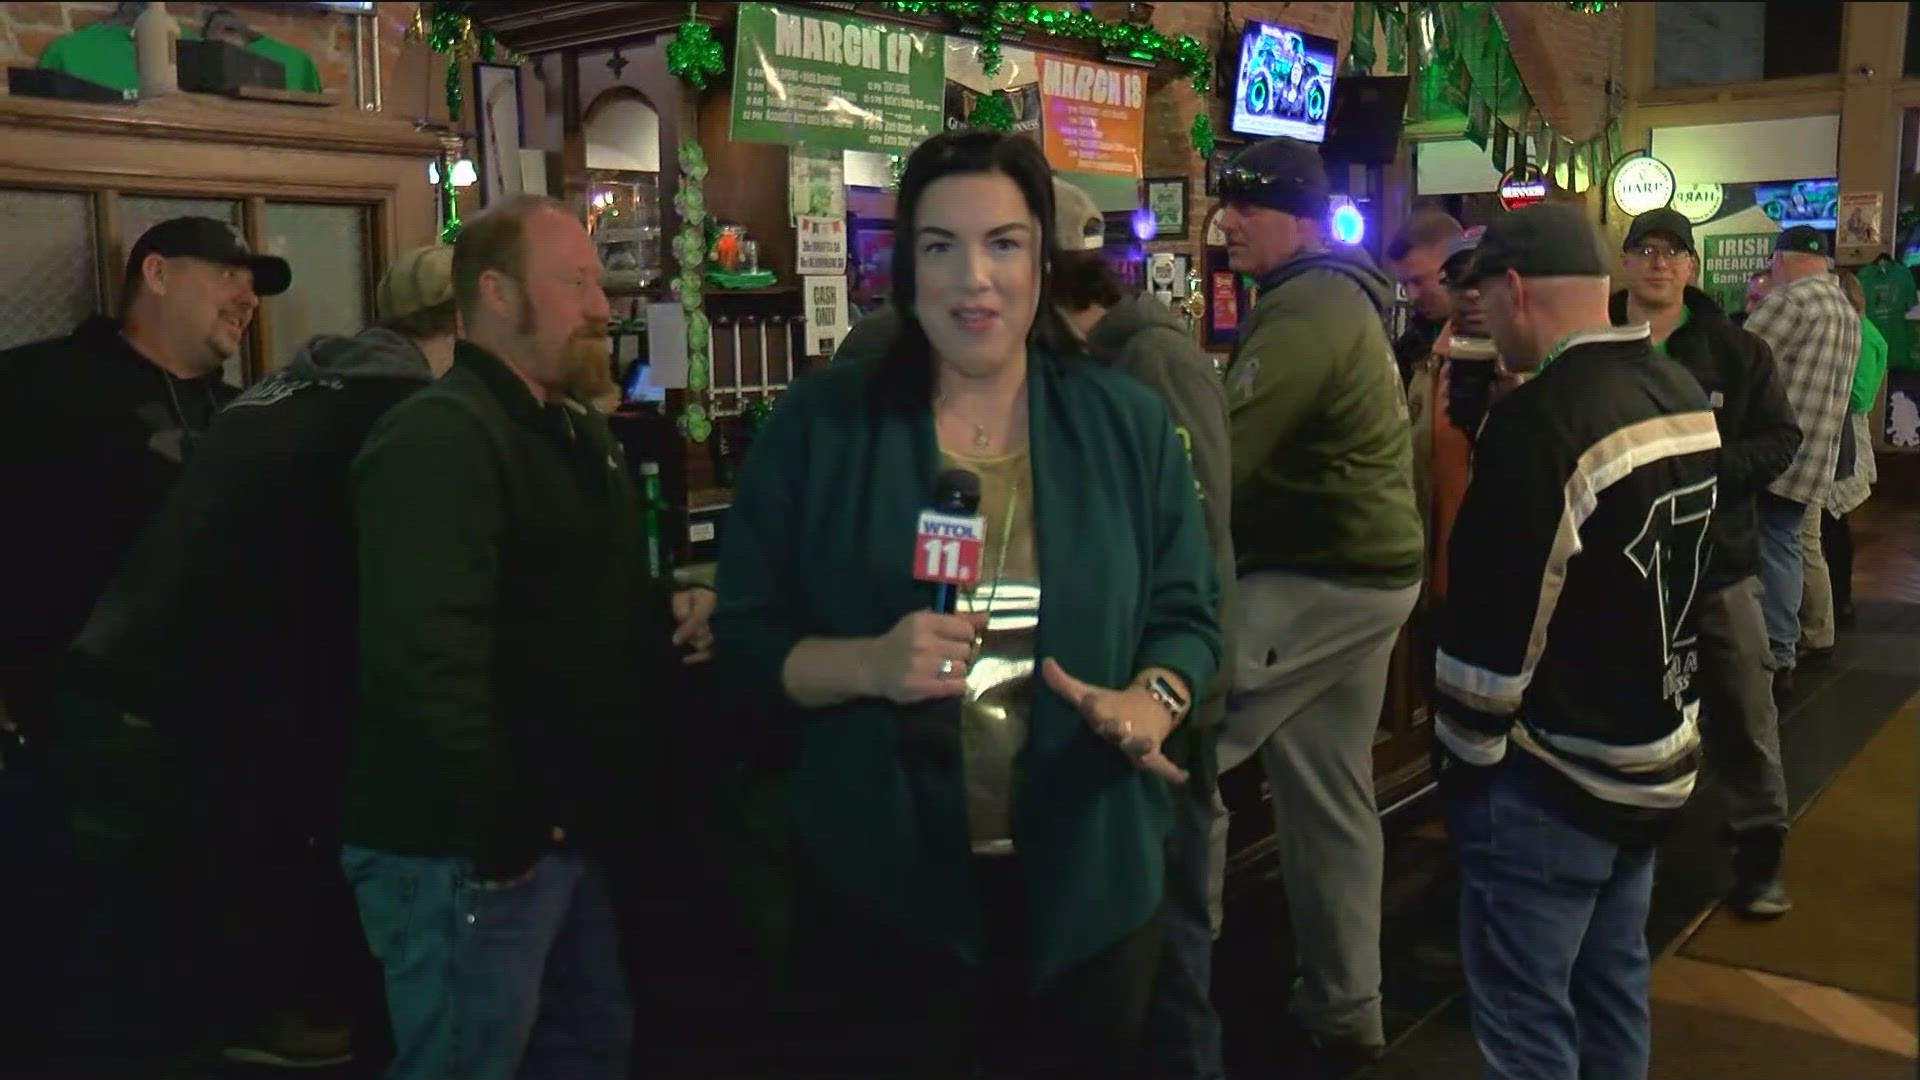 Toledoans celebrating St. Patrick's Day early Friday morning, Rain moves out ahead of colder afternoon and weekend, Rainy roadways, Don't drink and drive